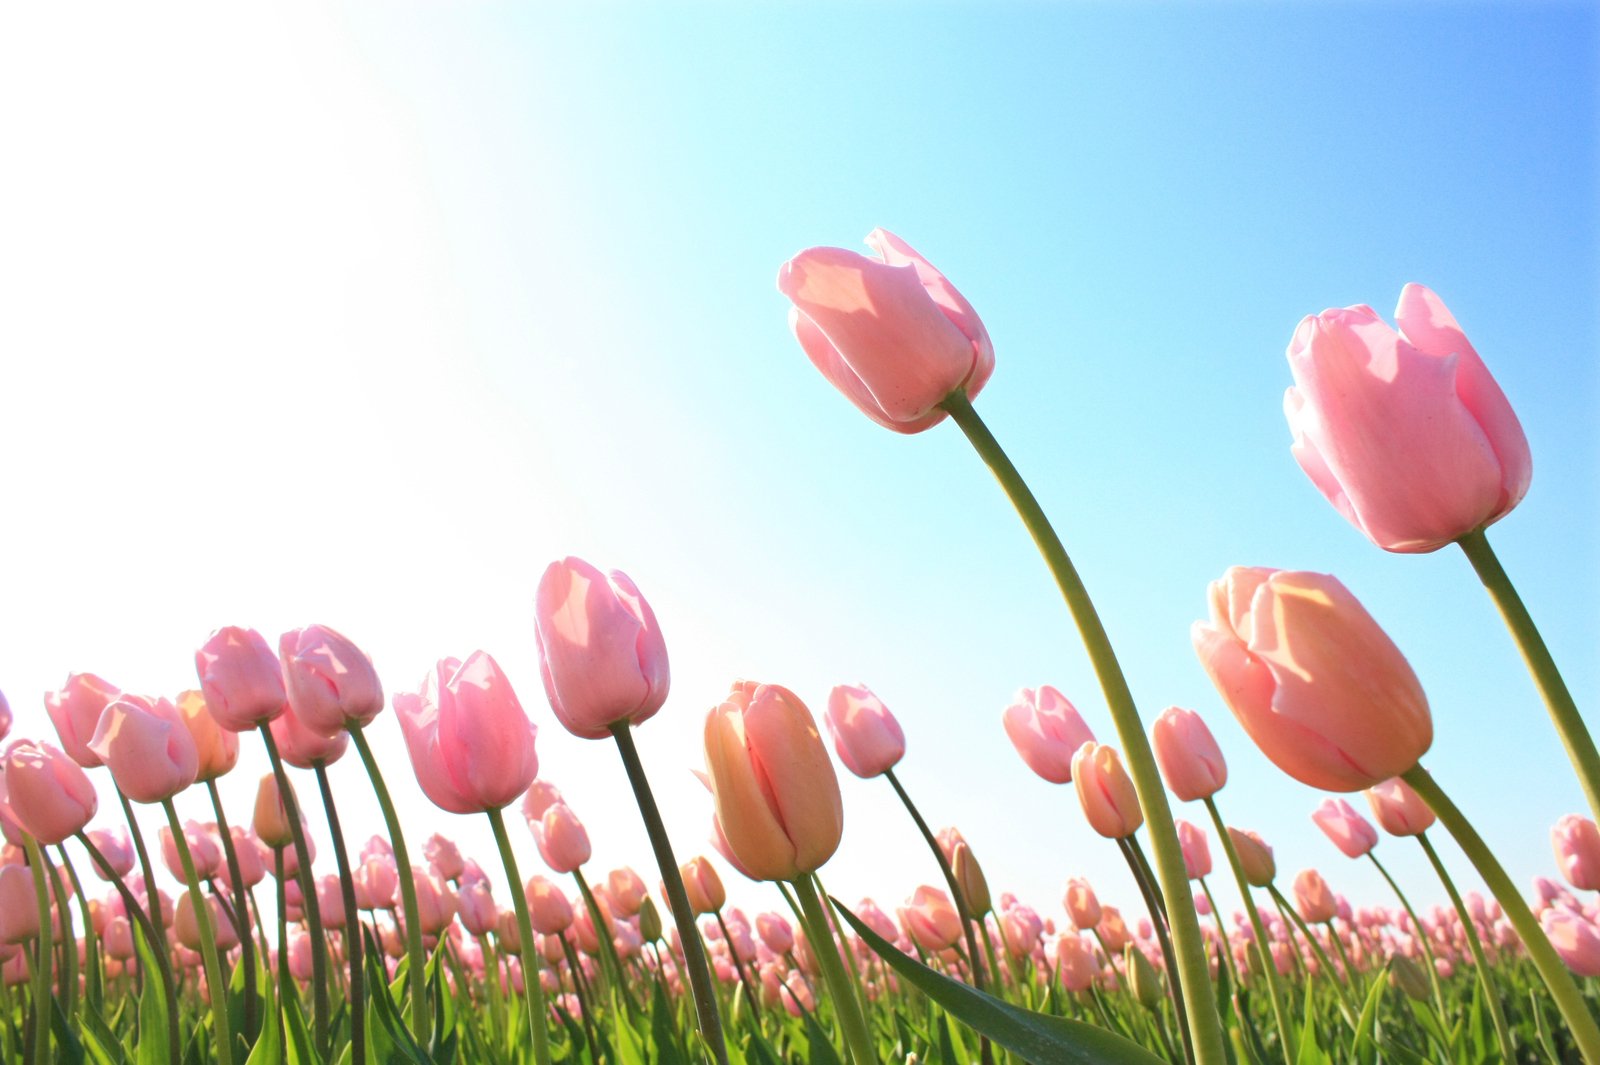 tulips of pink are ready to bloom, while the sun shines in the background